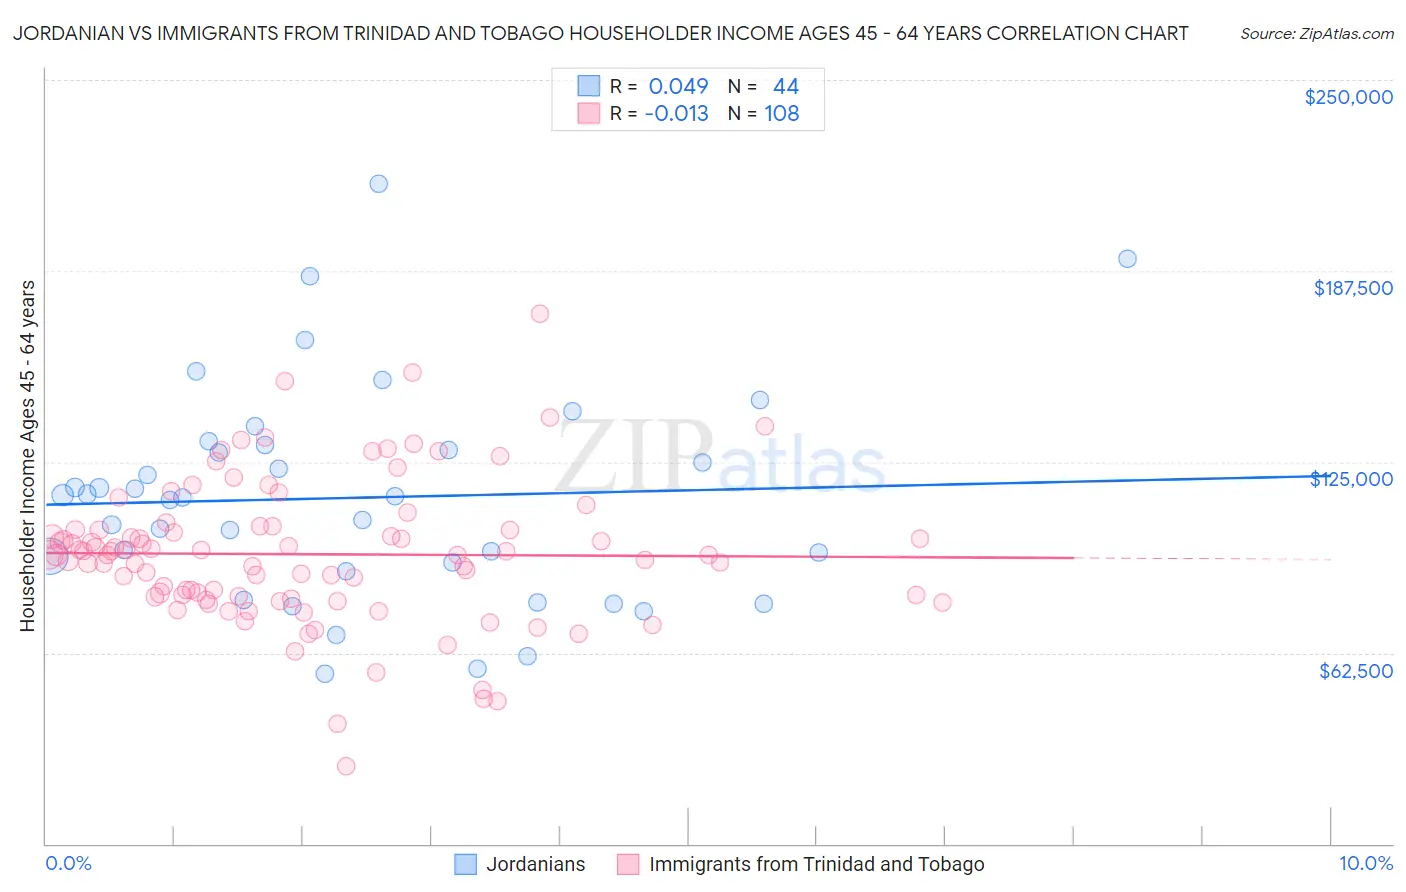 Jordanian vs Immigrants from Trinidad and Tobago Householder Income Ages 45 - 64 years